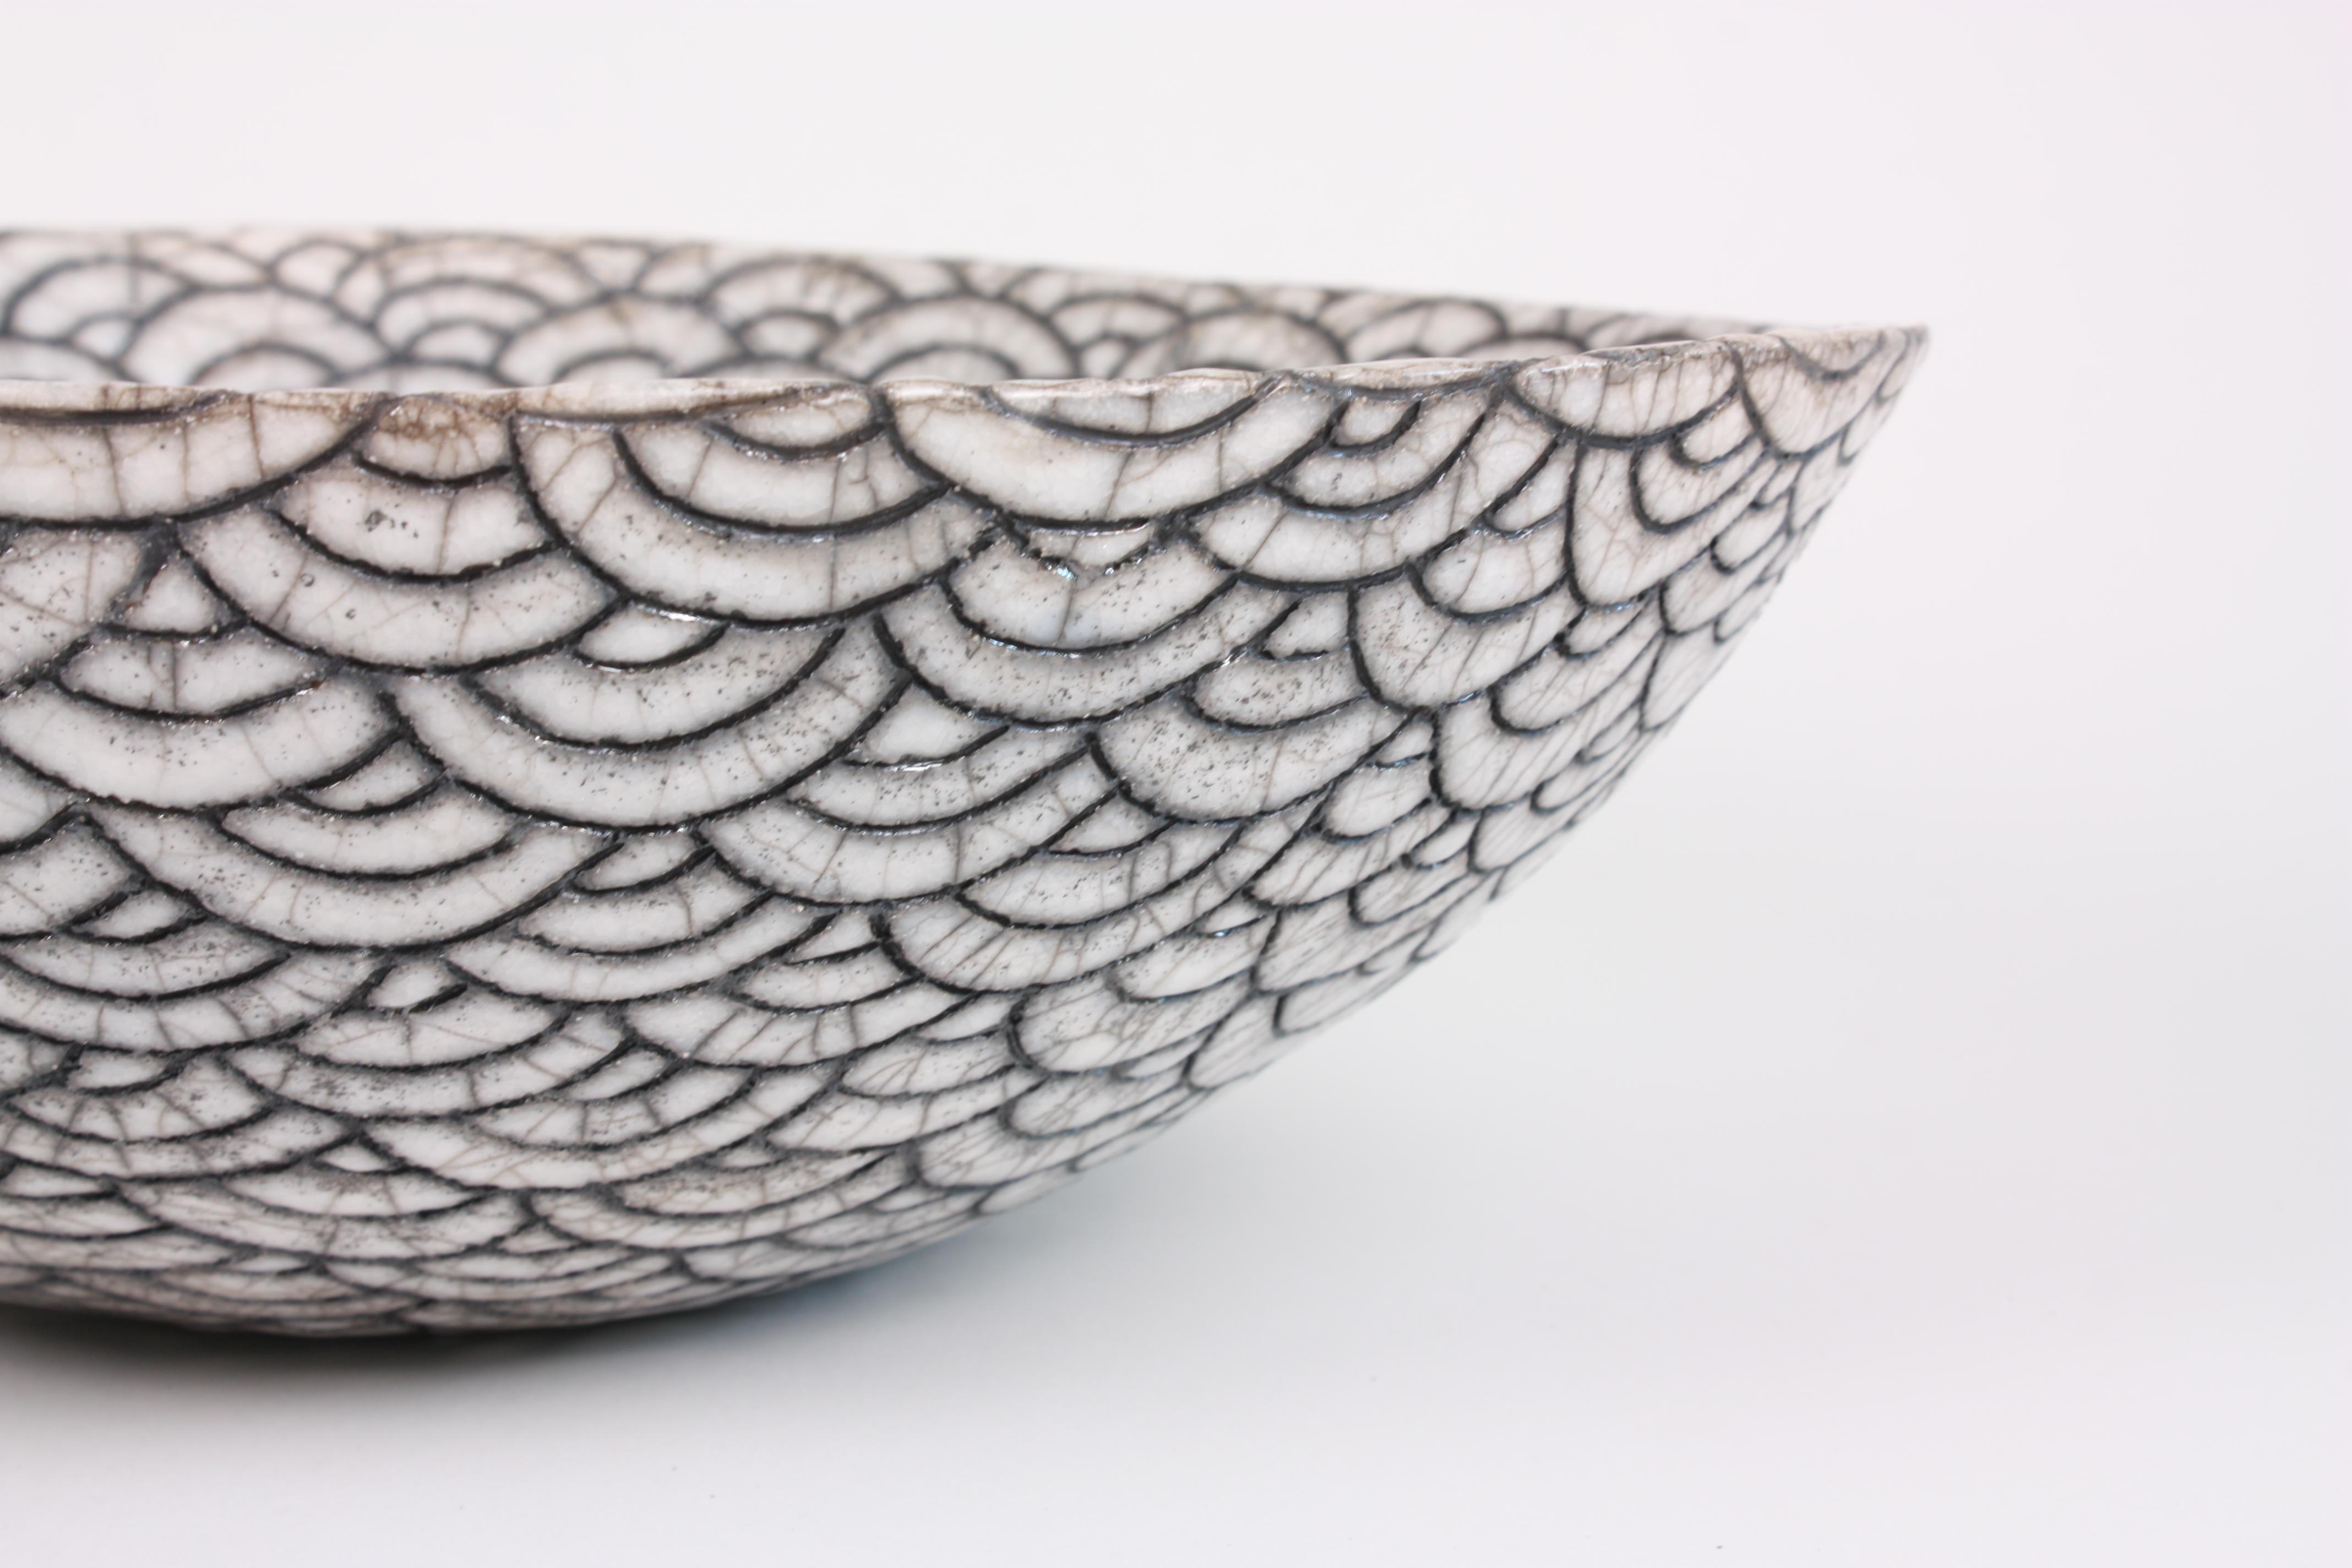 Contemporary Black and White Ceramic Bowl, Coupe Japonaise III 2